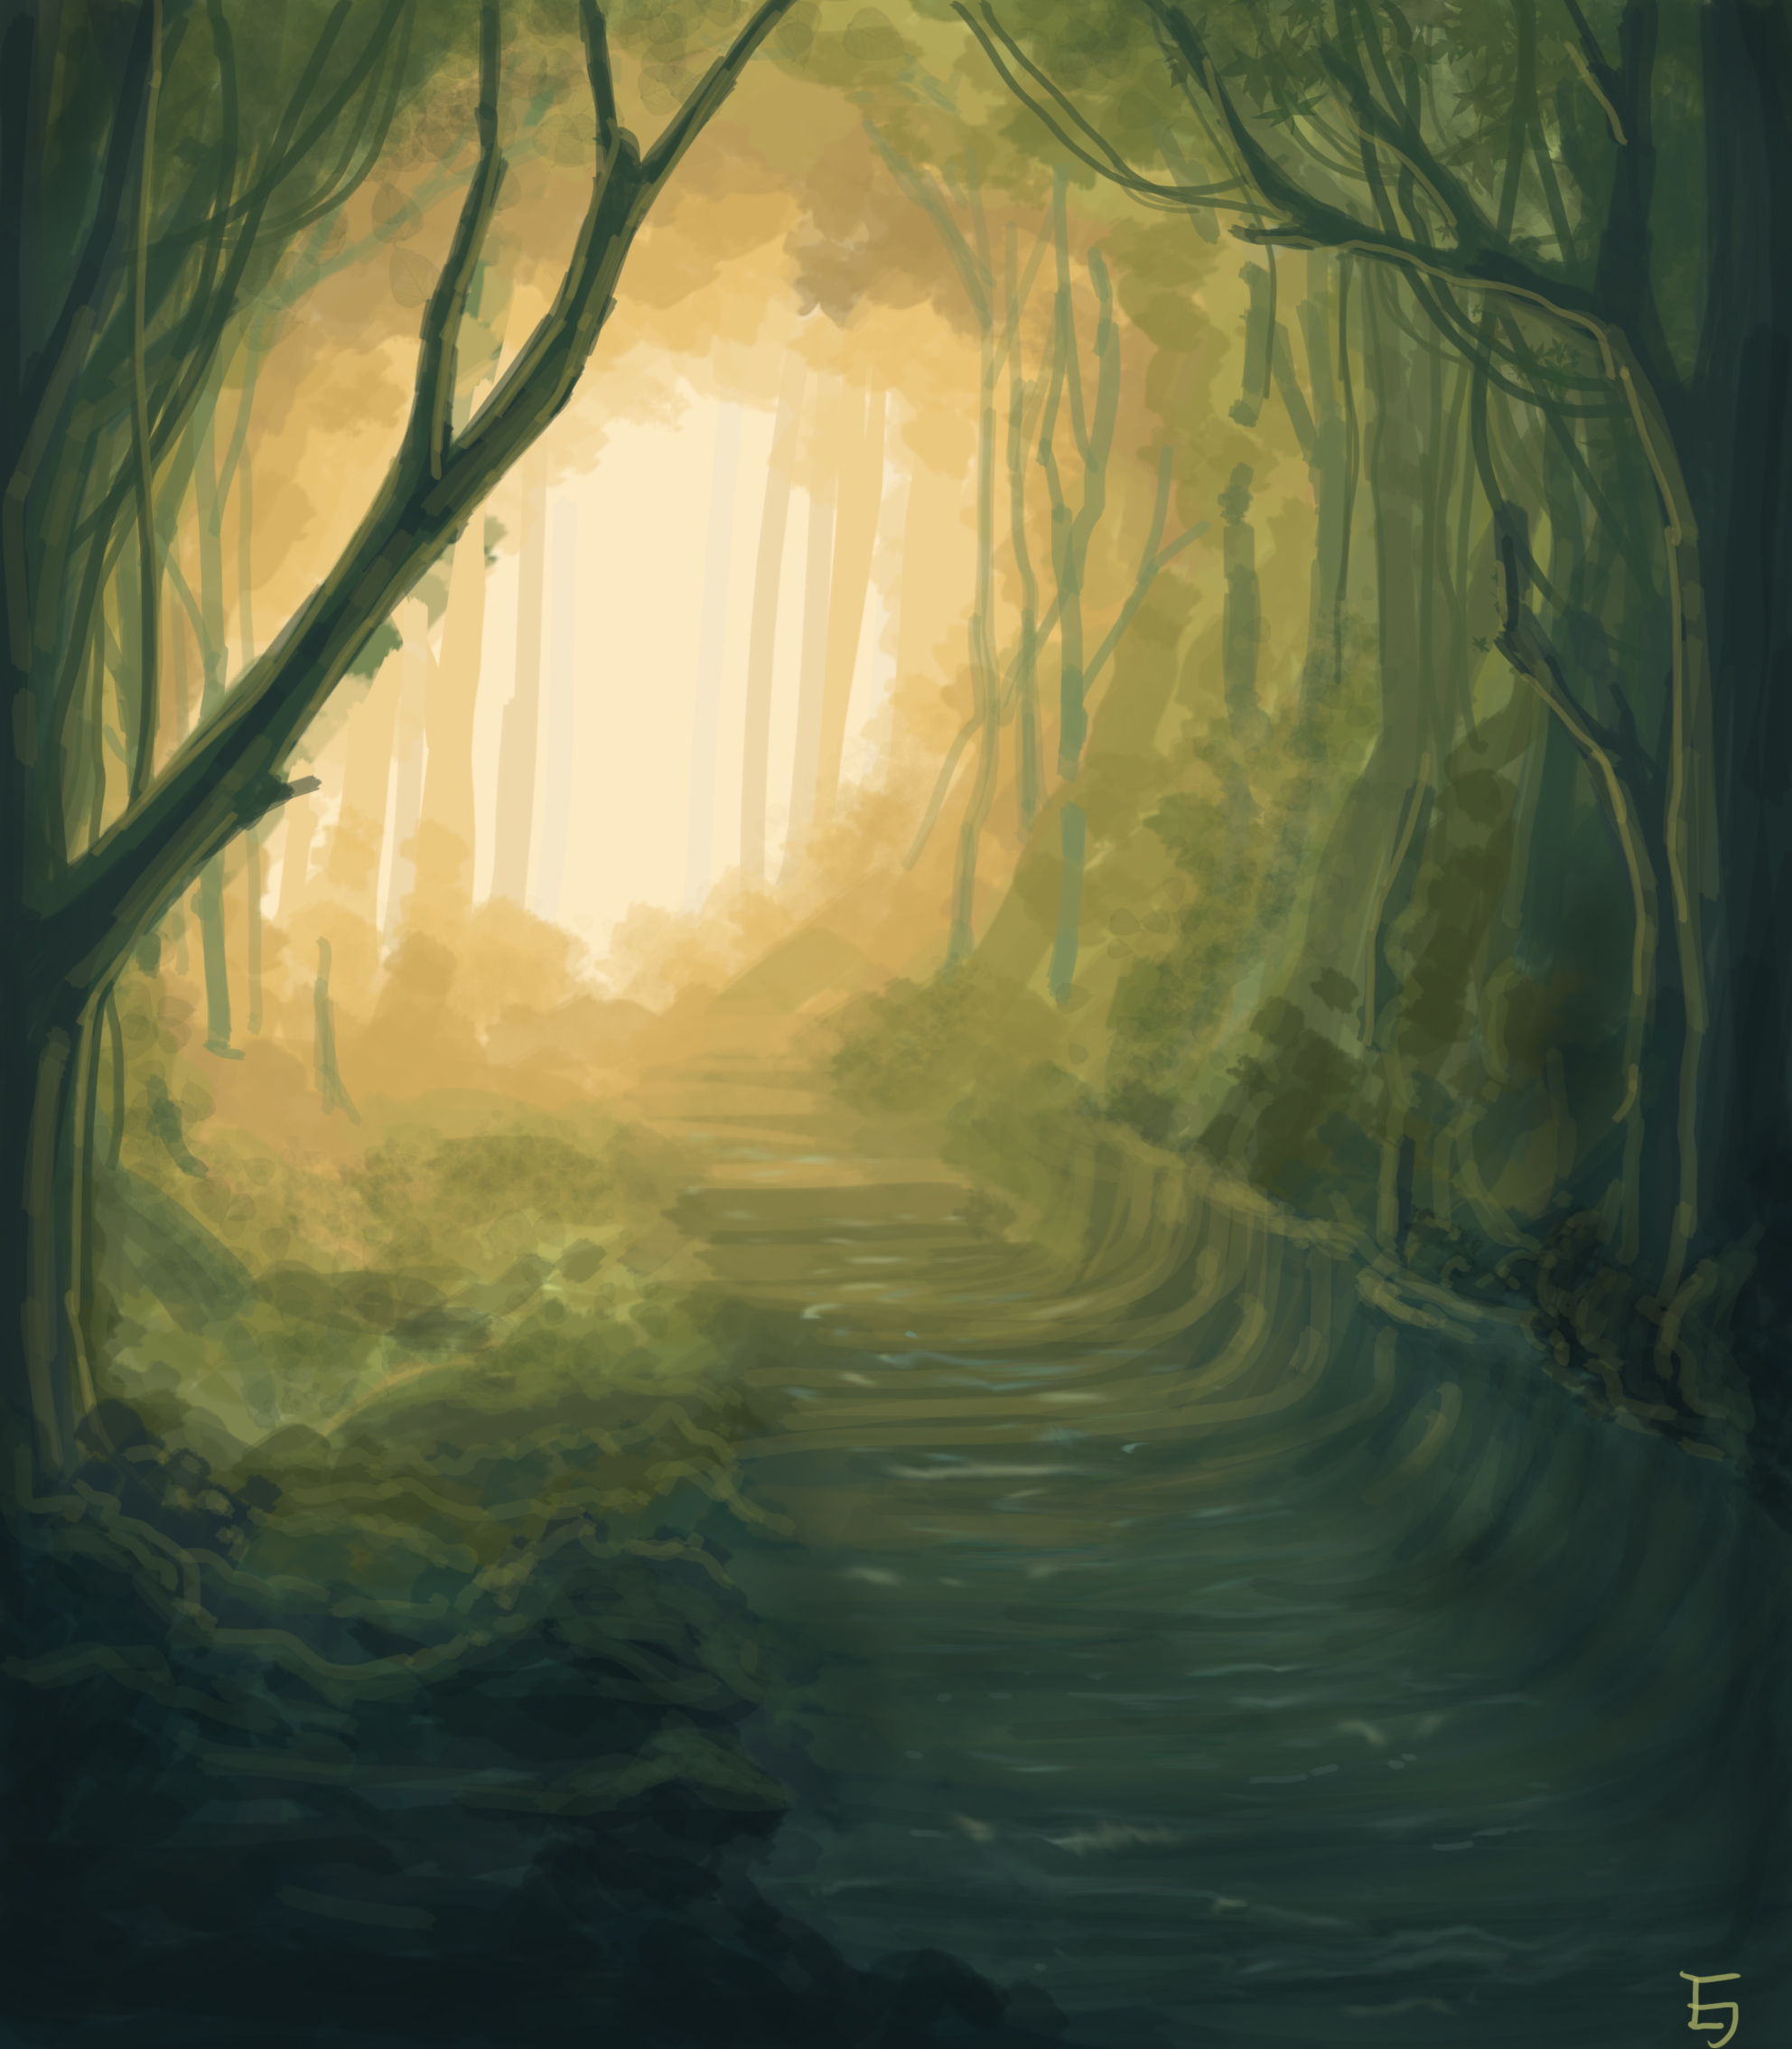 Forest light. Simple environment sketch. Photoshop drawing/painting